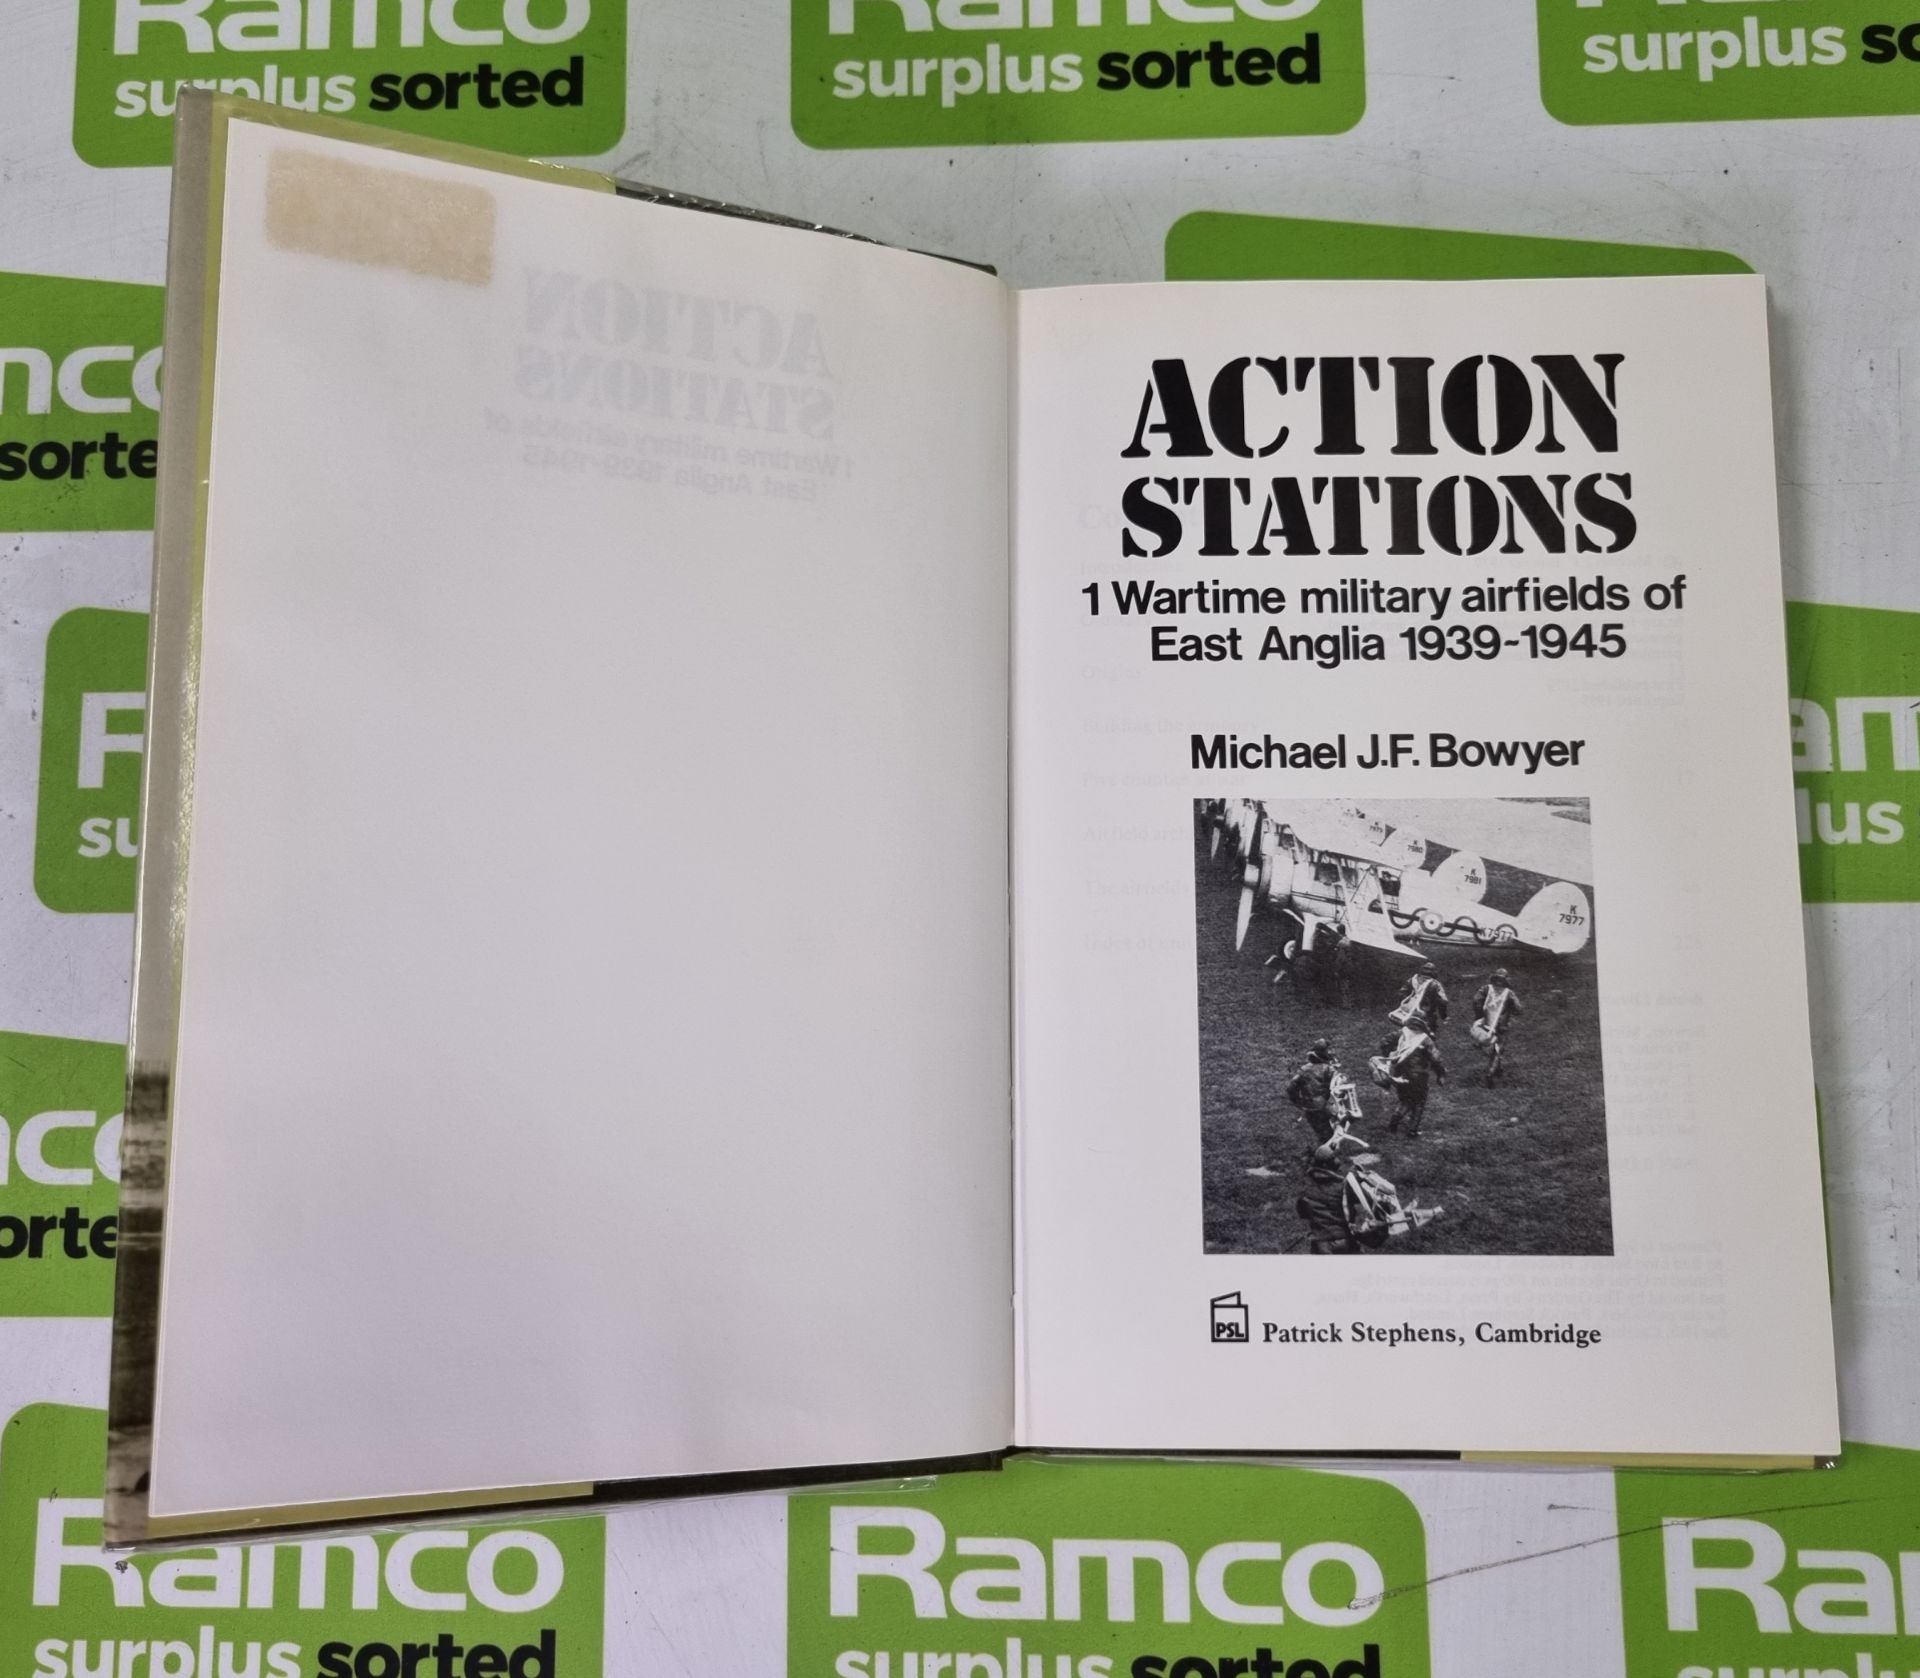 Action Stations Series of Books - Image 3 of 35